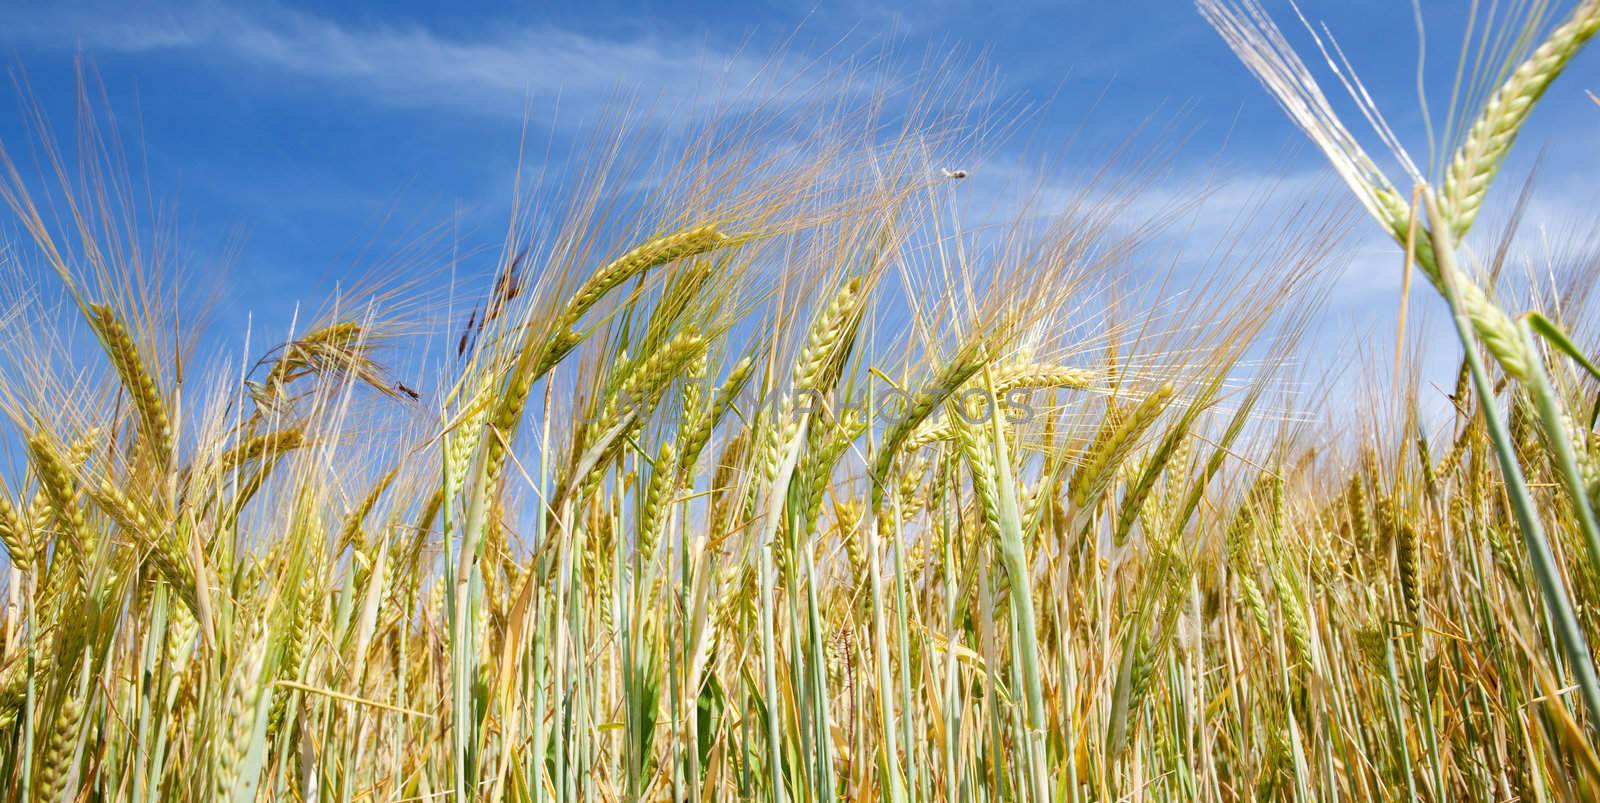 Frontal image of wheat field